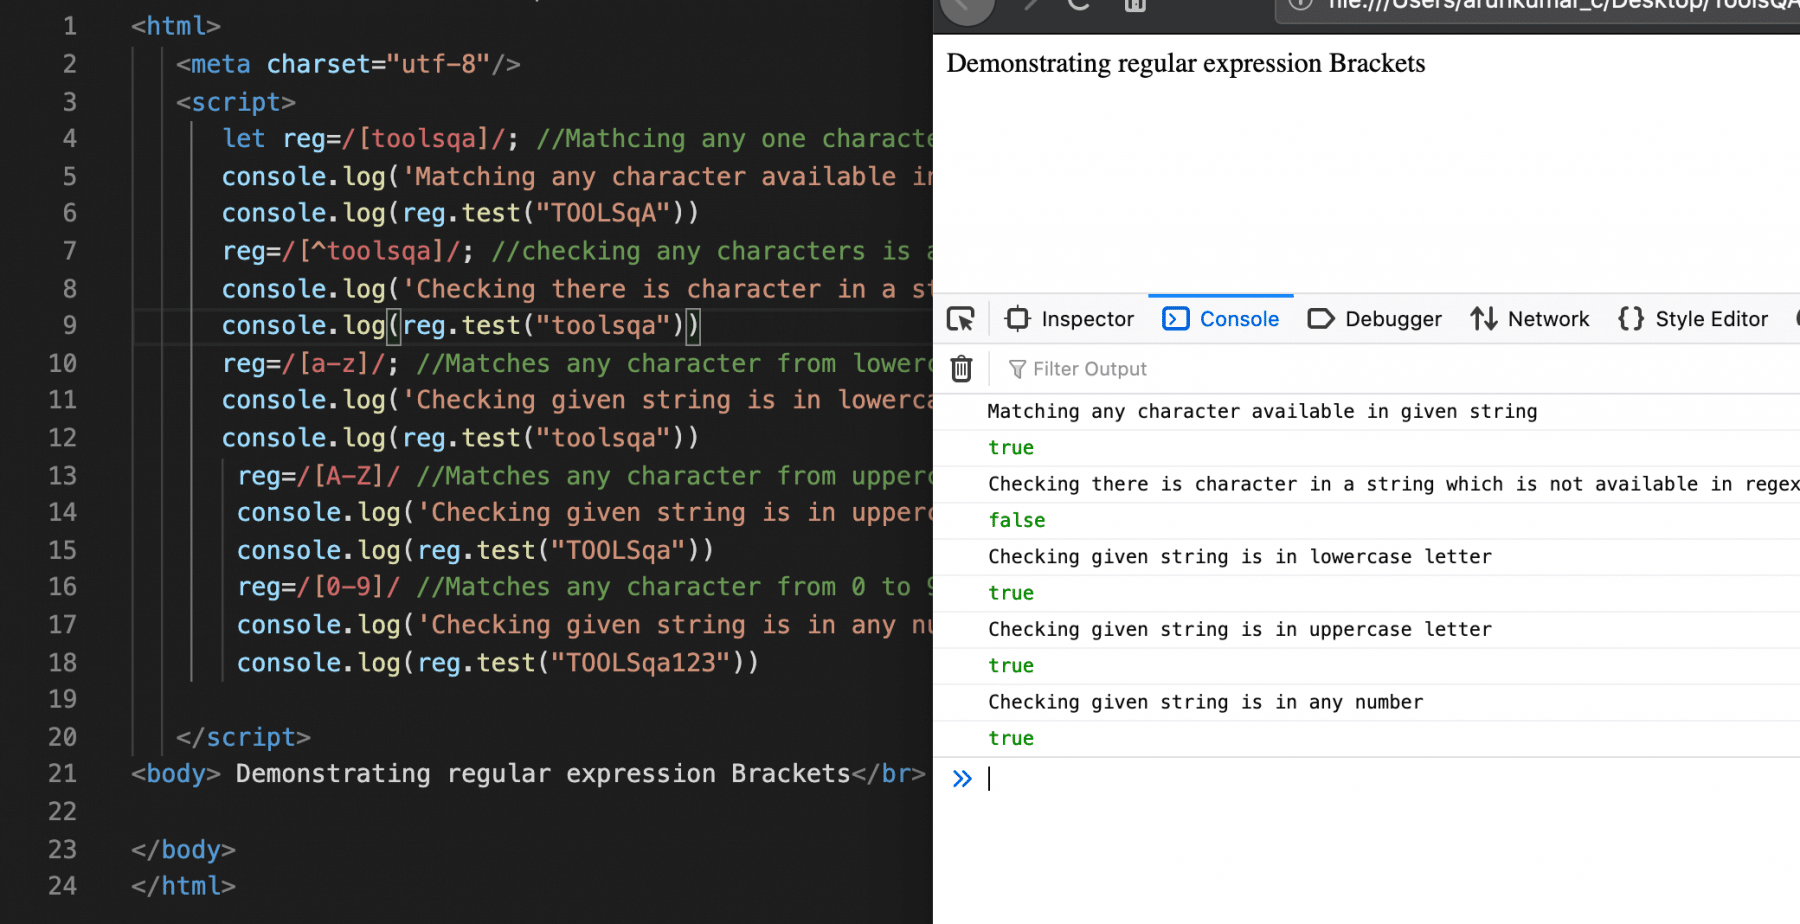  Using Brackets to define a regular expression in JavaScript